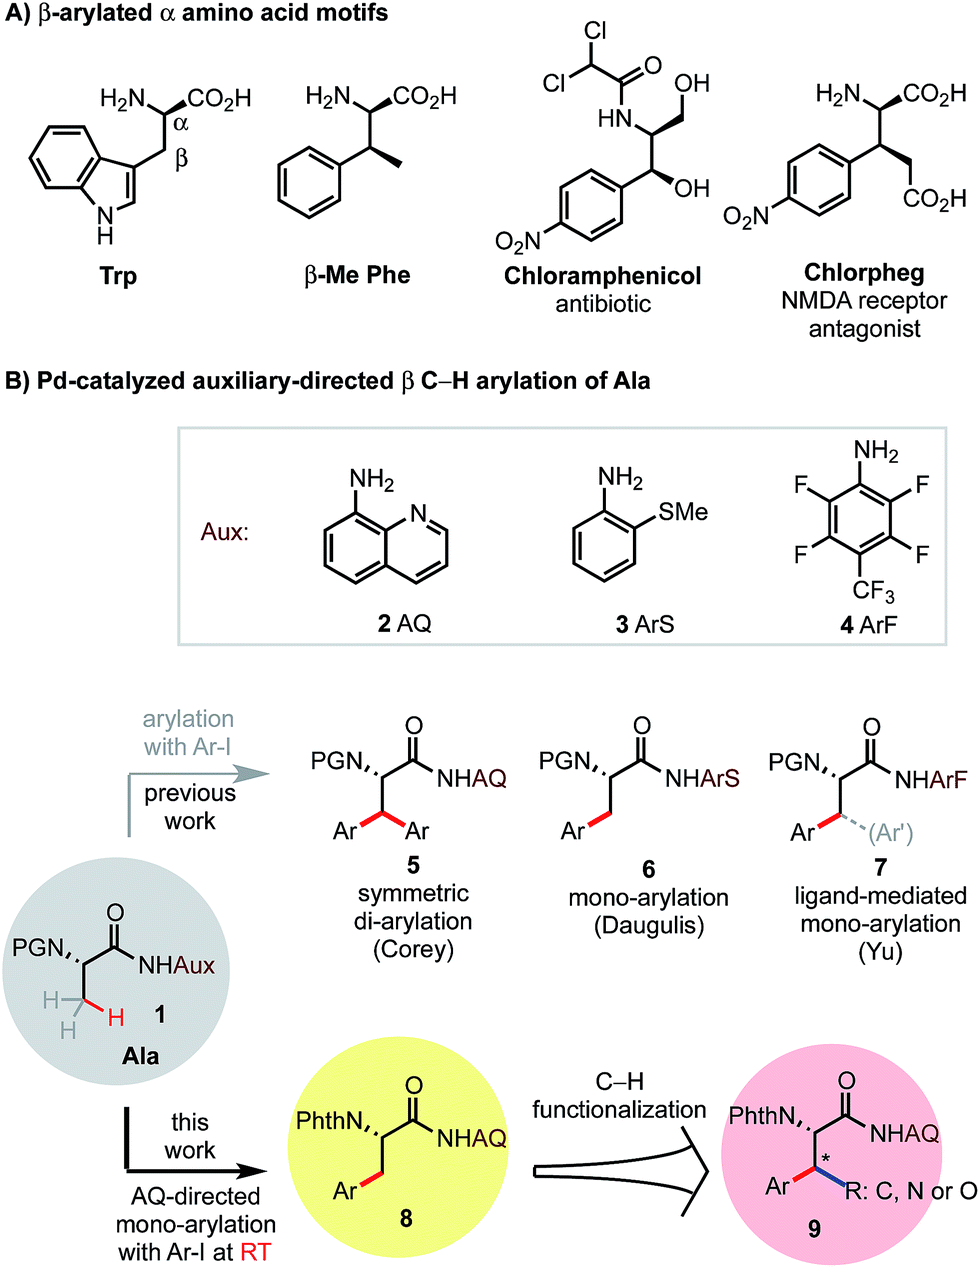 Palladium-catalyzed trifluoroacetate-promoted mono-arylation of the  β-methyl group of alanine at room temperature: synthesis of β-arylated  α-amino acids through sequential C–H functionalization - Chemical Science  (RSC Publishing)